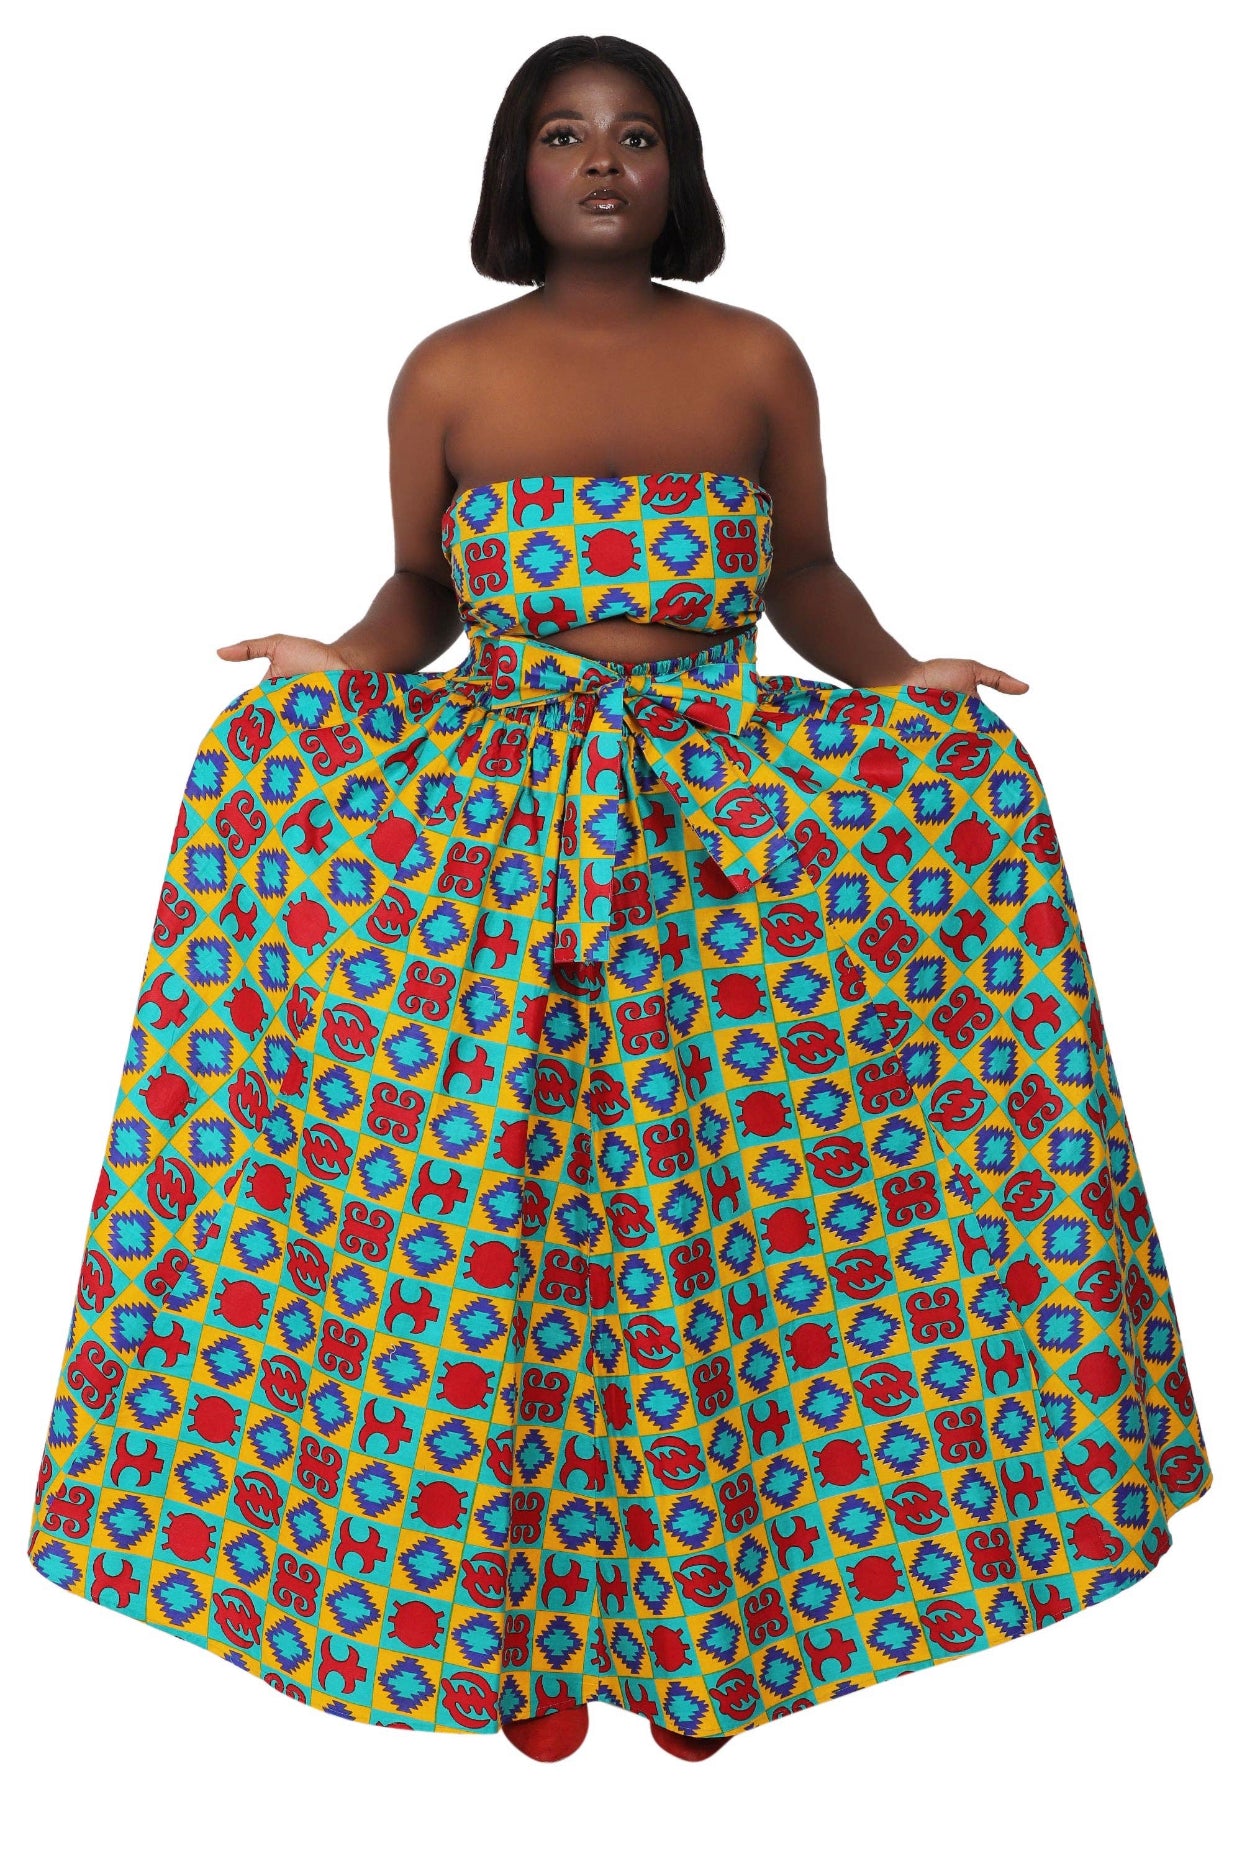 Hand Mad African Print Full Skirt with Coordinating Head Wrap and Facemask (Red, Blue, Yellow Patterns)